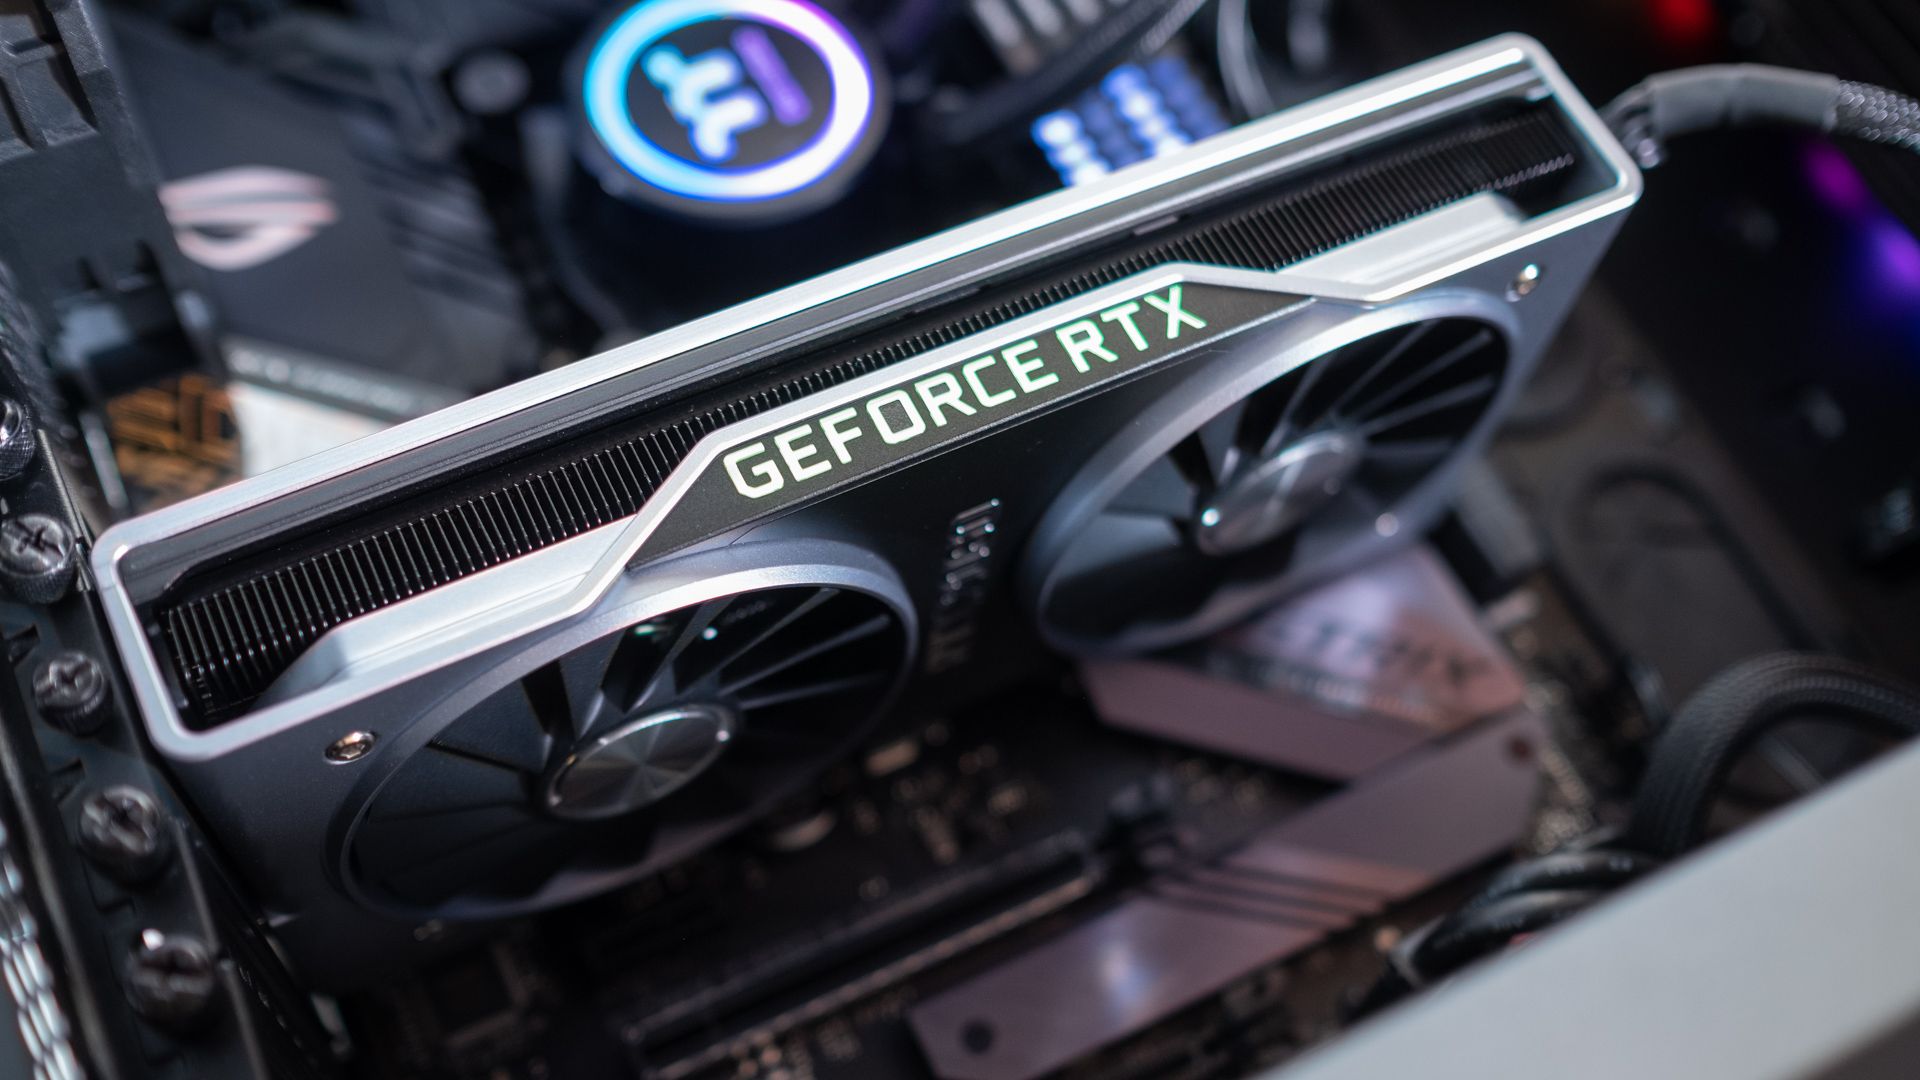 Nvidia GeForce RTX 2060 could be receiving an 8GB update, if it is